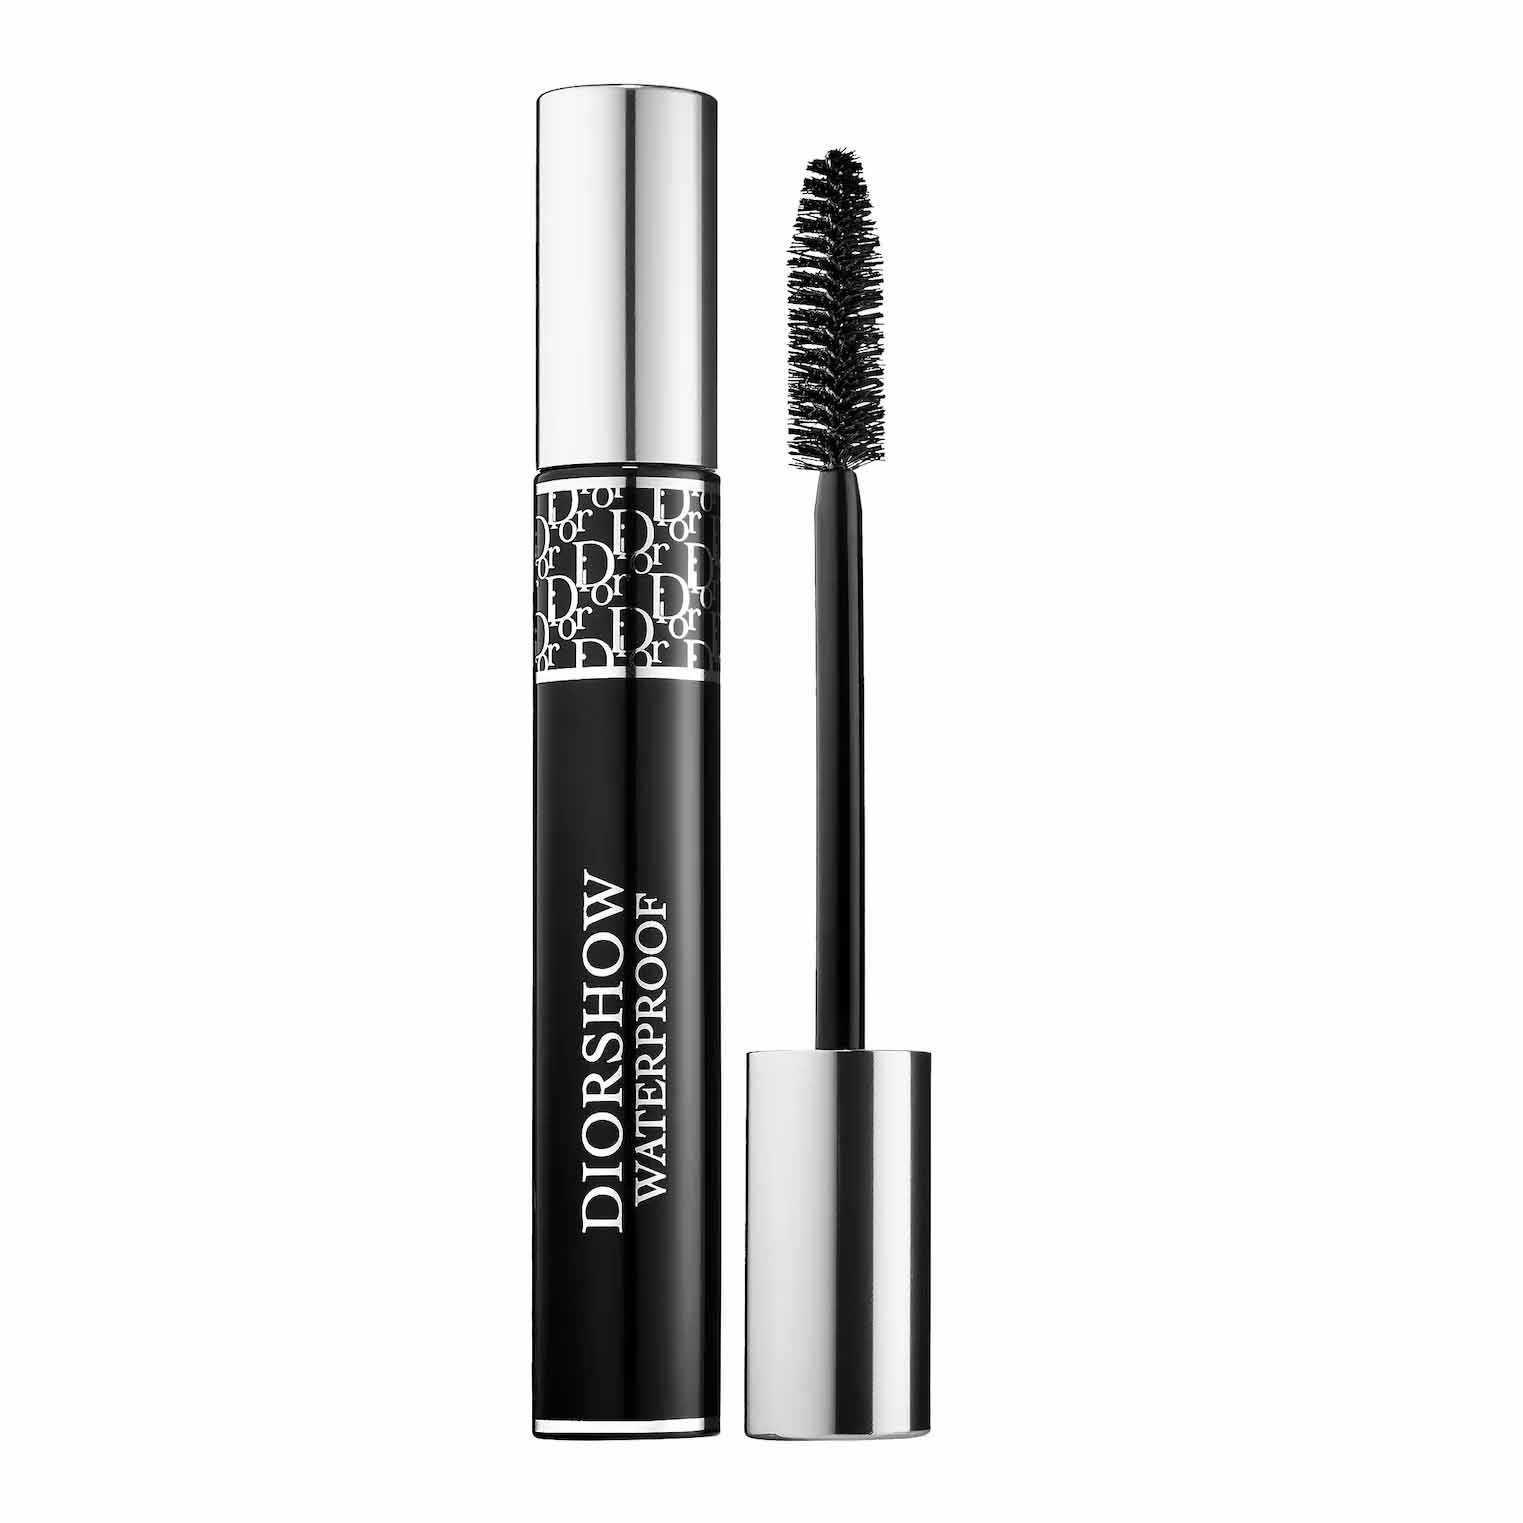 Diorshow Waterproof Mascara in black and silver tube 